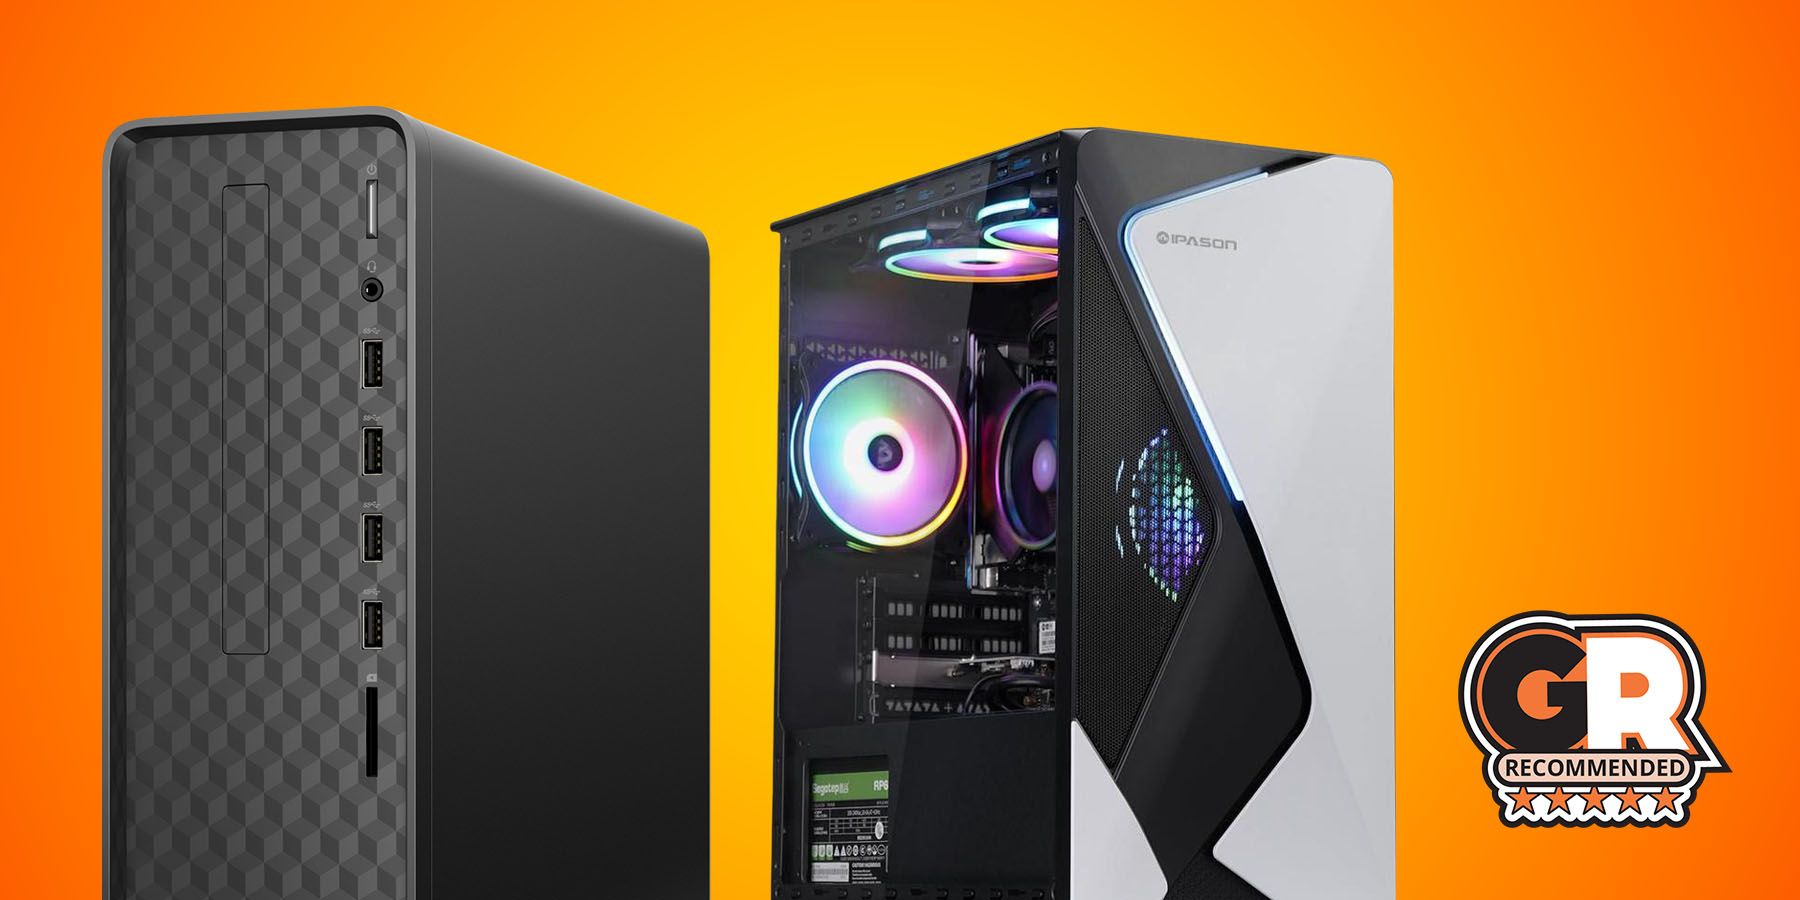 Game On a Budget: The Mini Gaming PC You Need